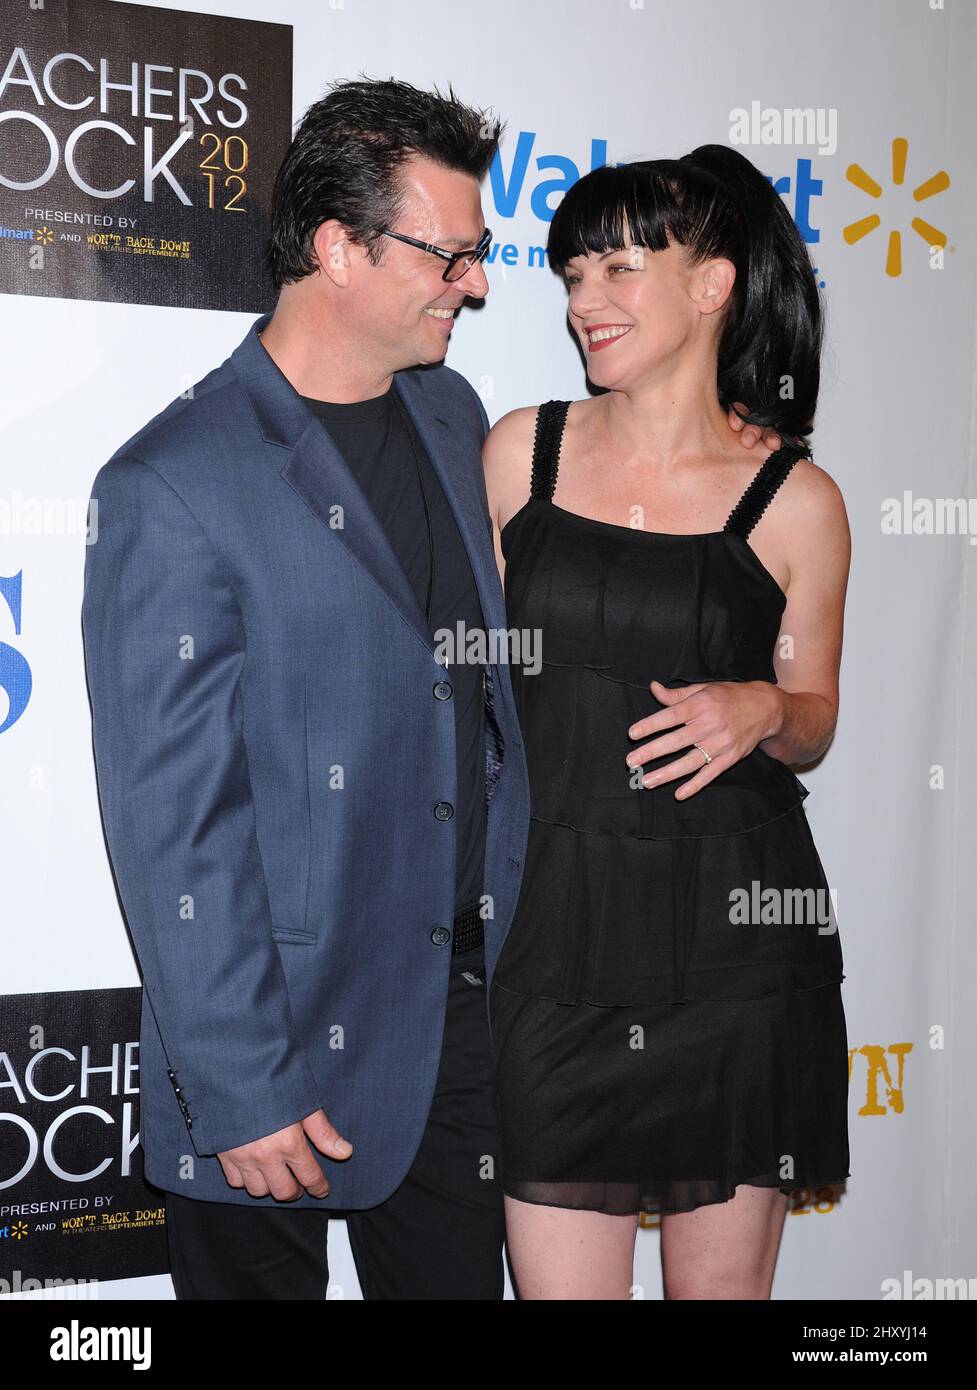 Pauley Perrette and finace Thomas Arklie attends CBS' Teacher's Rock Special Live Concert Press Room at Nokia Theatre L.A. Live, Los Angeles. Stock Photo